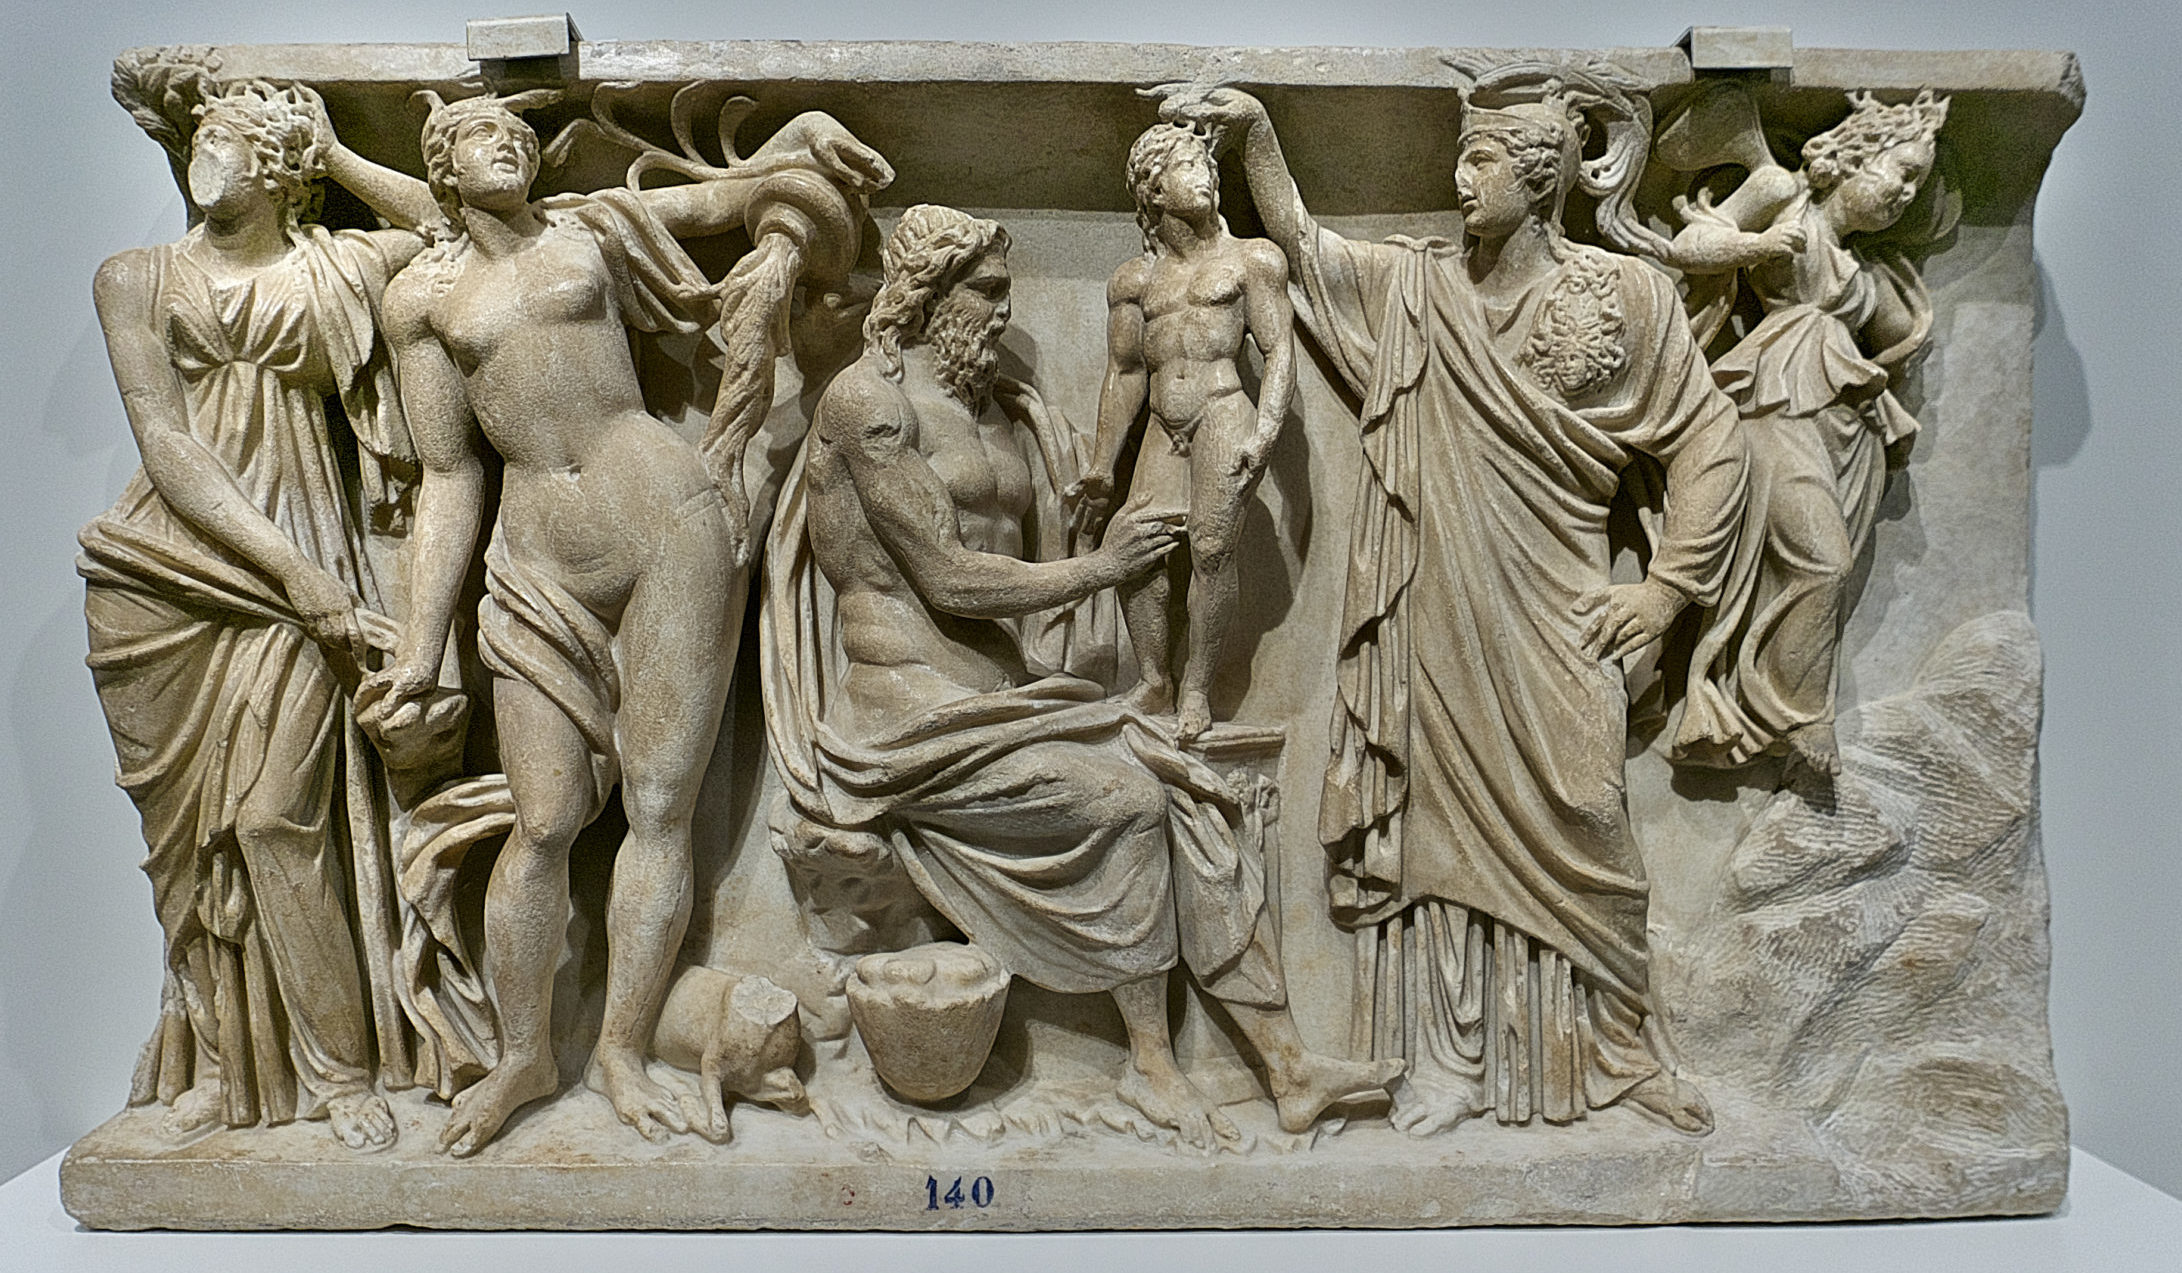 Prometheus sits with a small figure of a man on his lap. Athena stands in front of him, her hand on the head of the small man. Various other deity figures stand by.